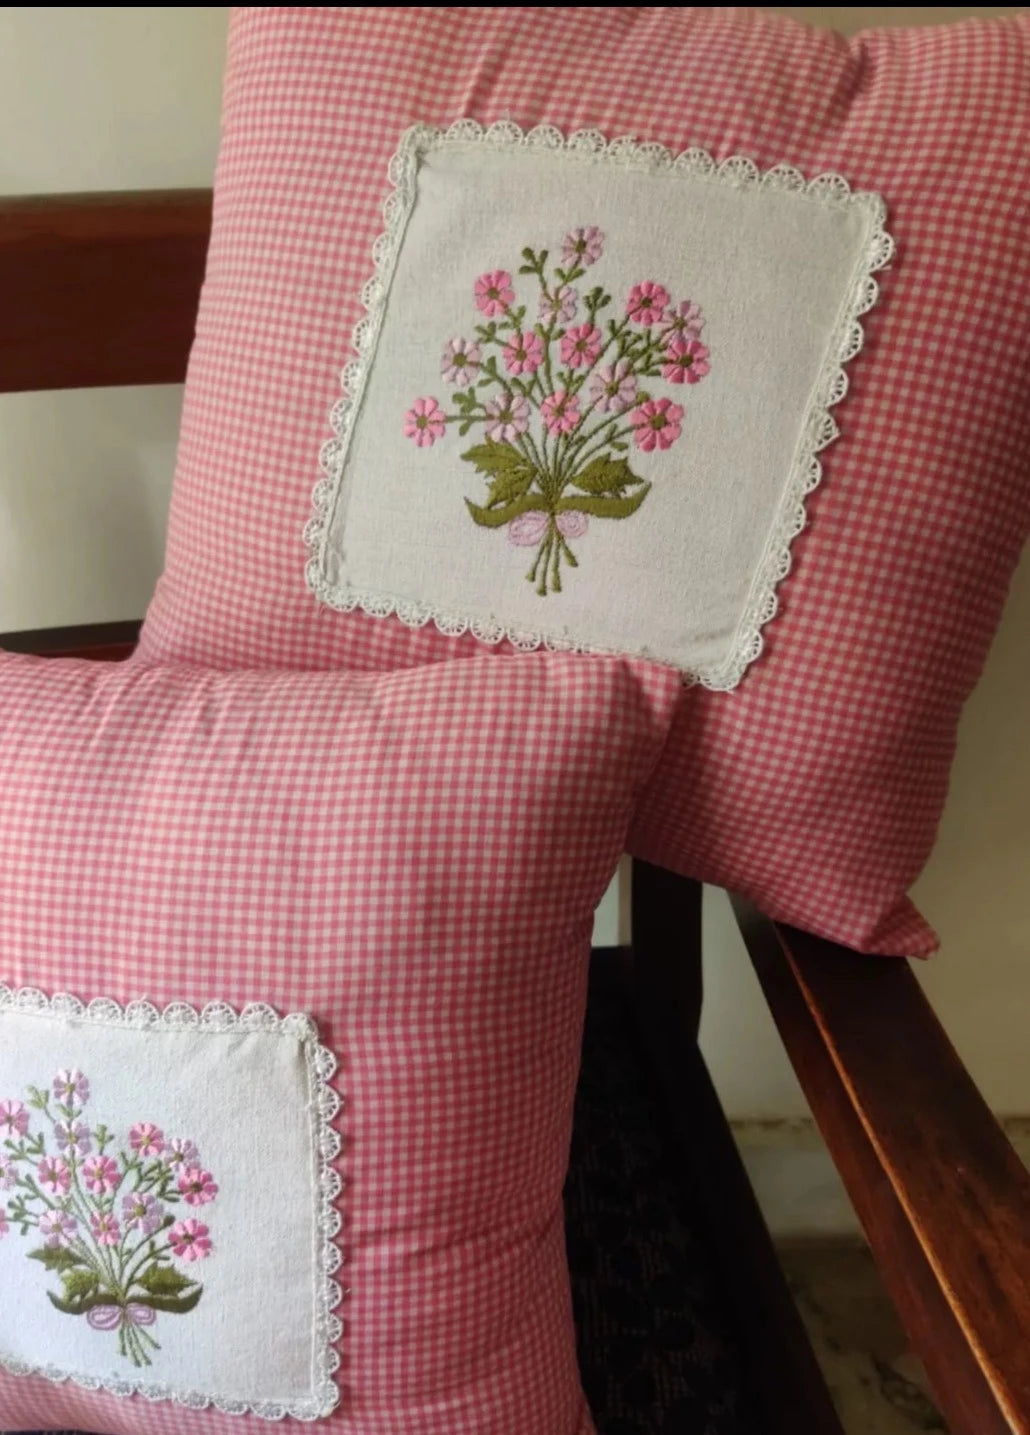 Gingham Print Floral Embroidered Cushion cover with lace